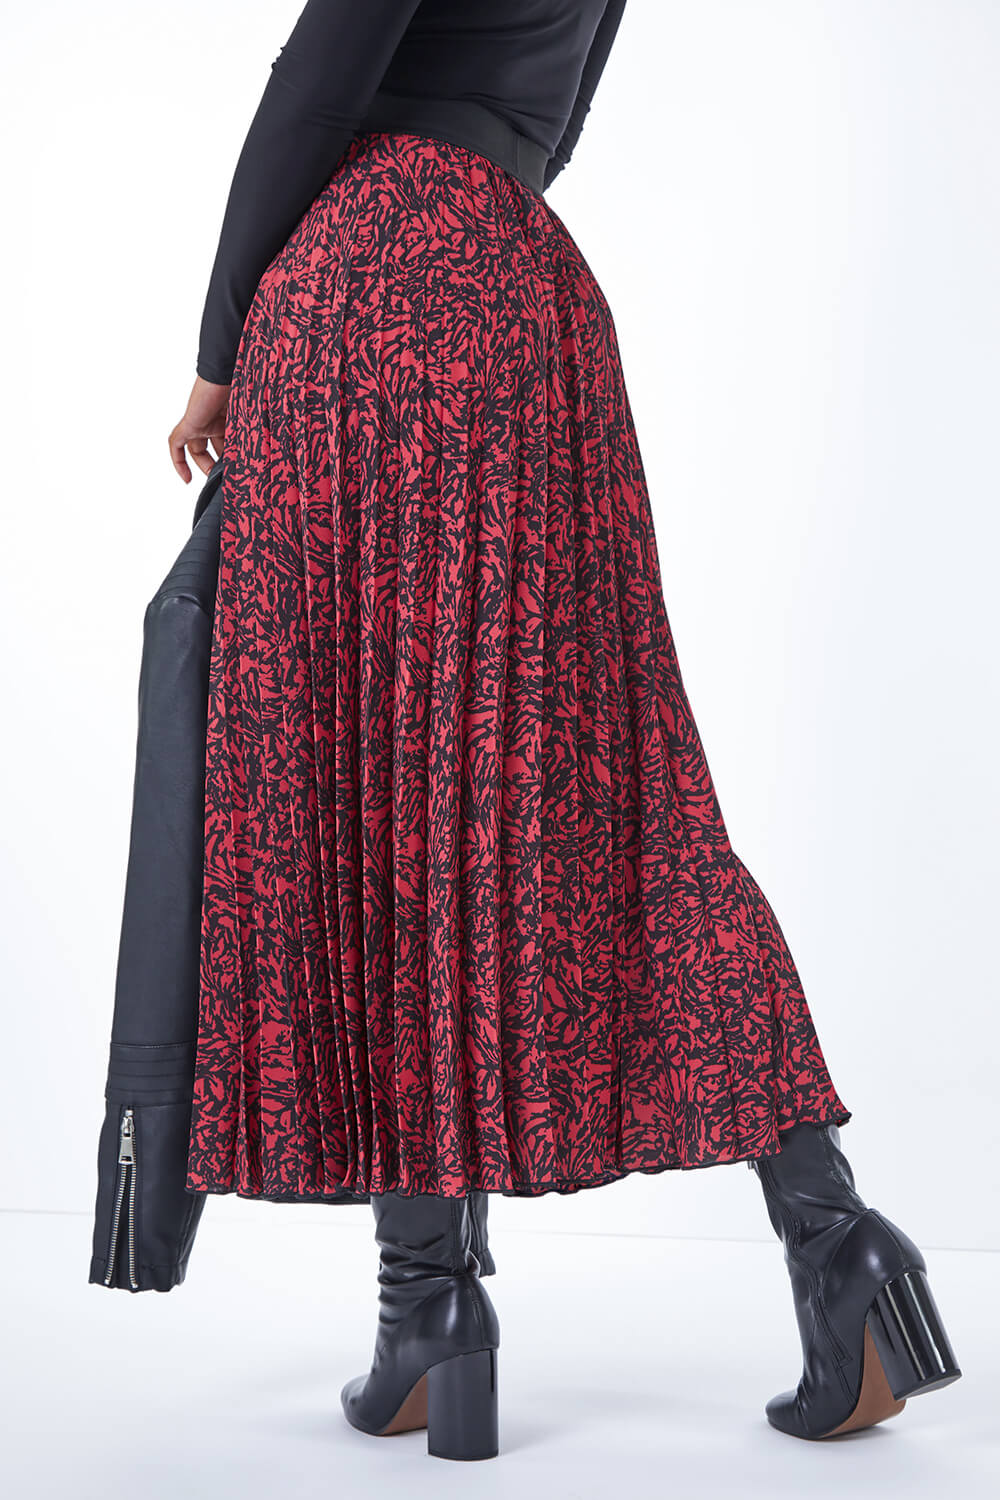 Red Petite Abstract Print Pleated Skirt, Image 4 of 5